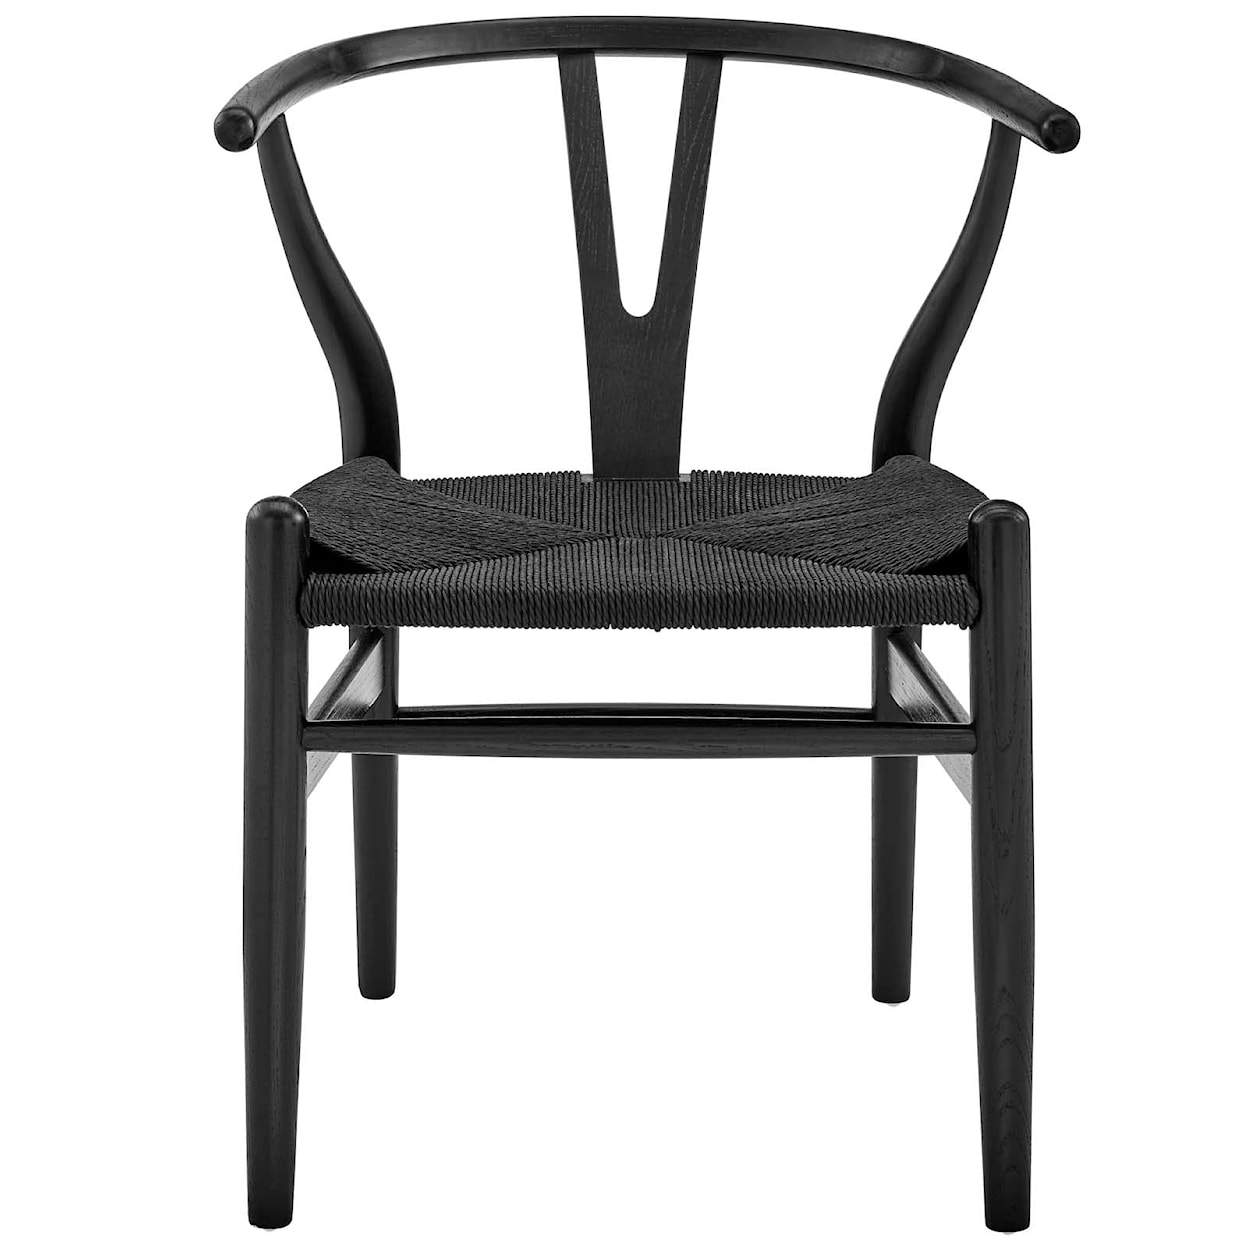 Modway Amish Amish Dining Armchair Set of 2